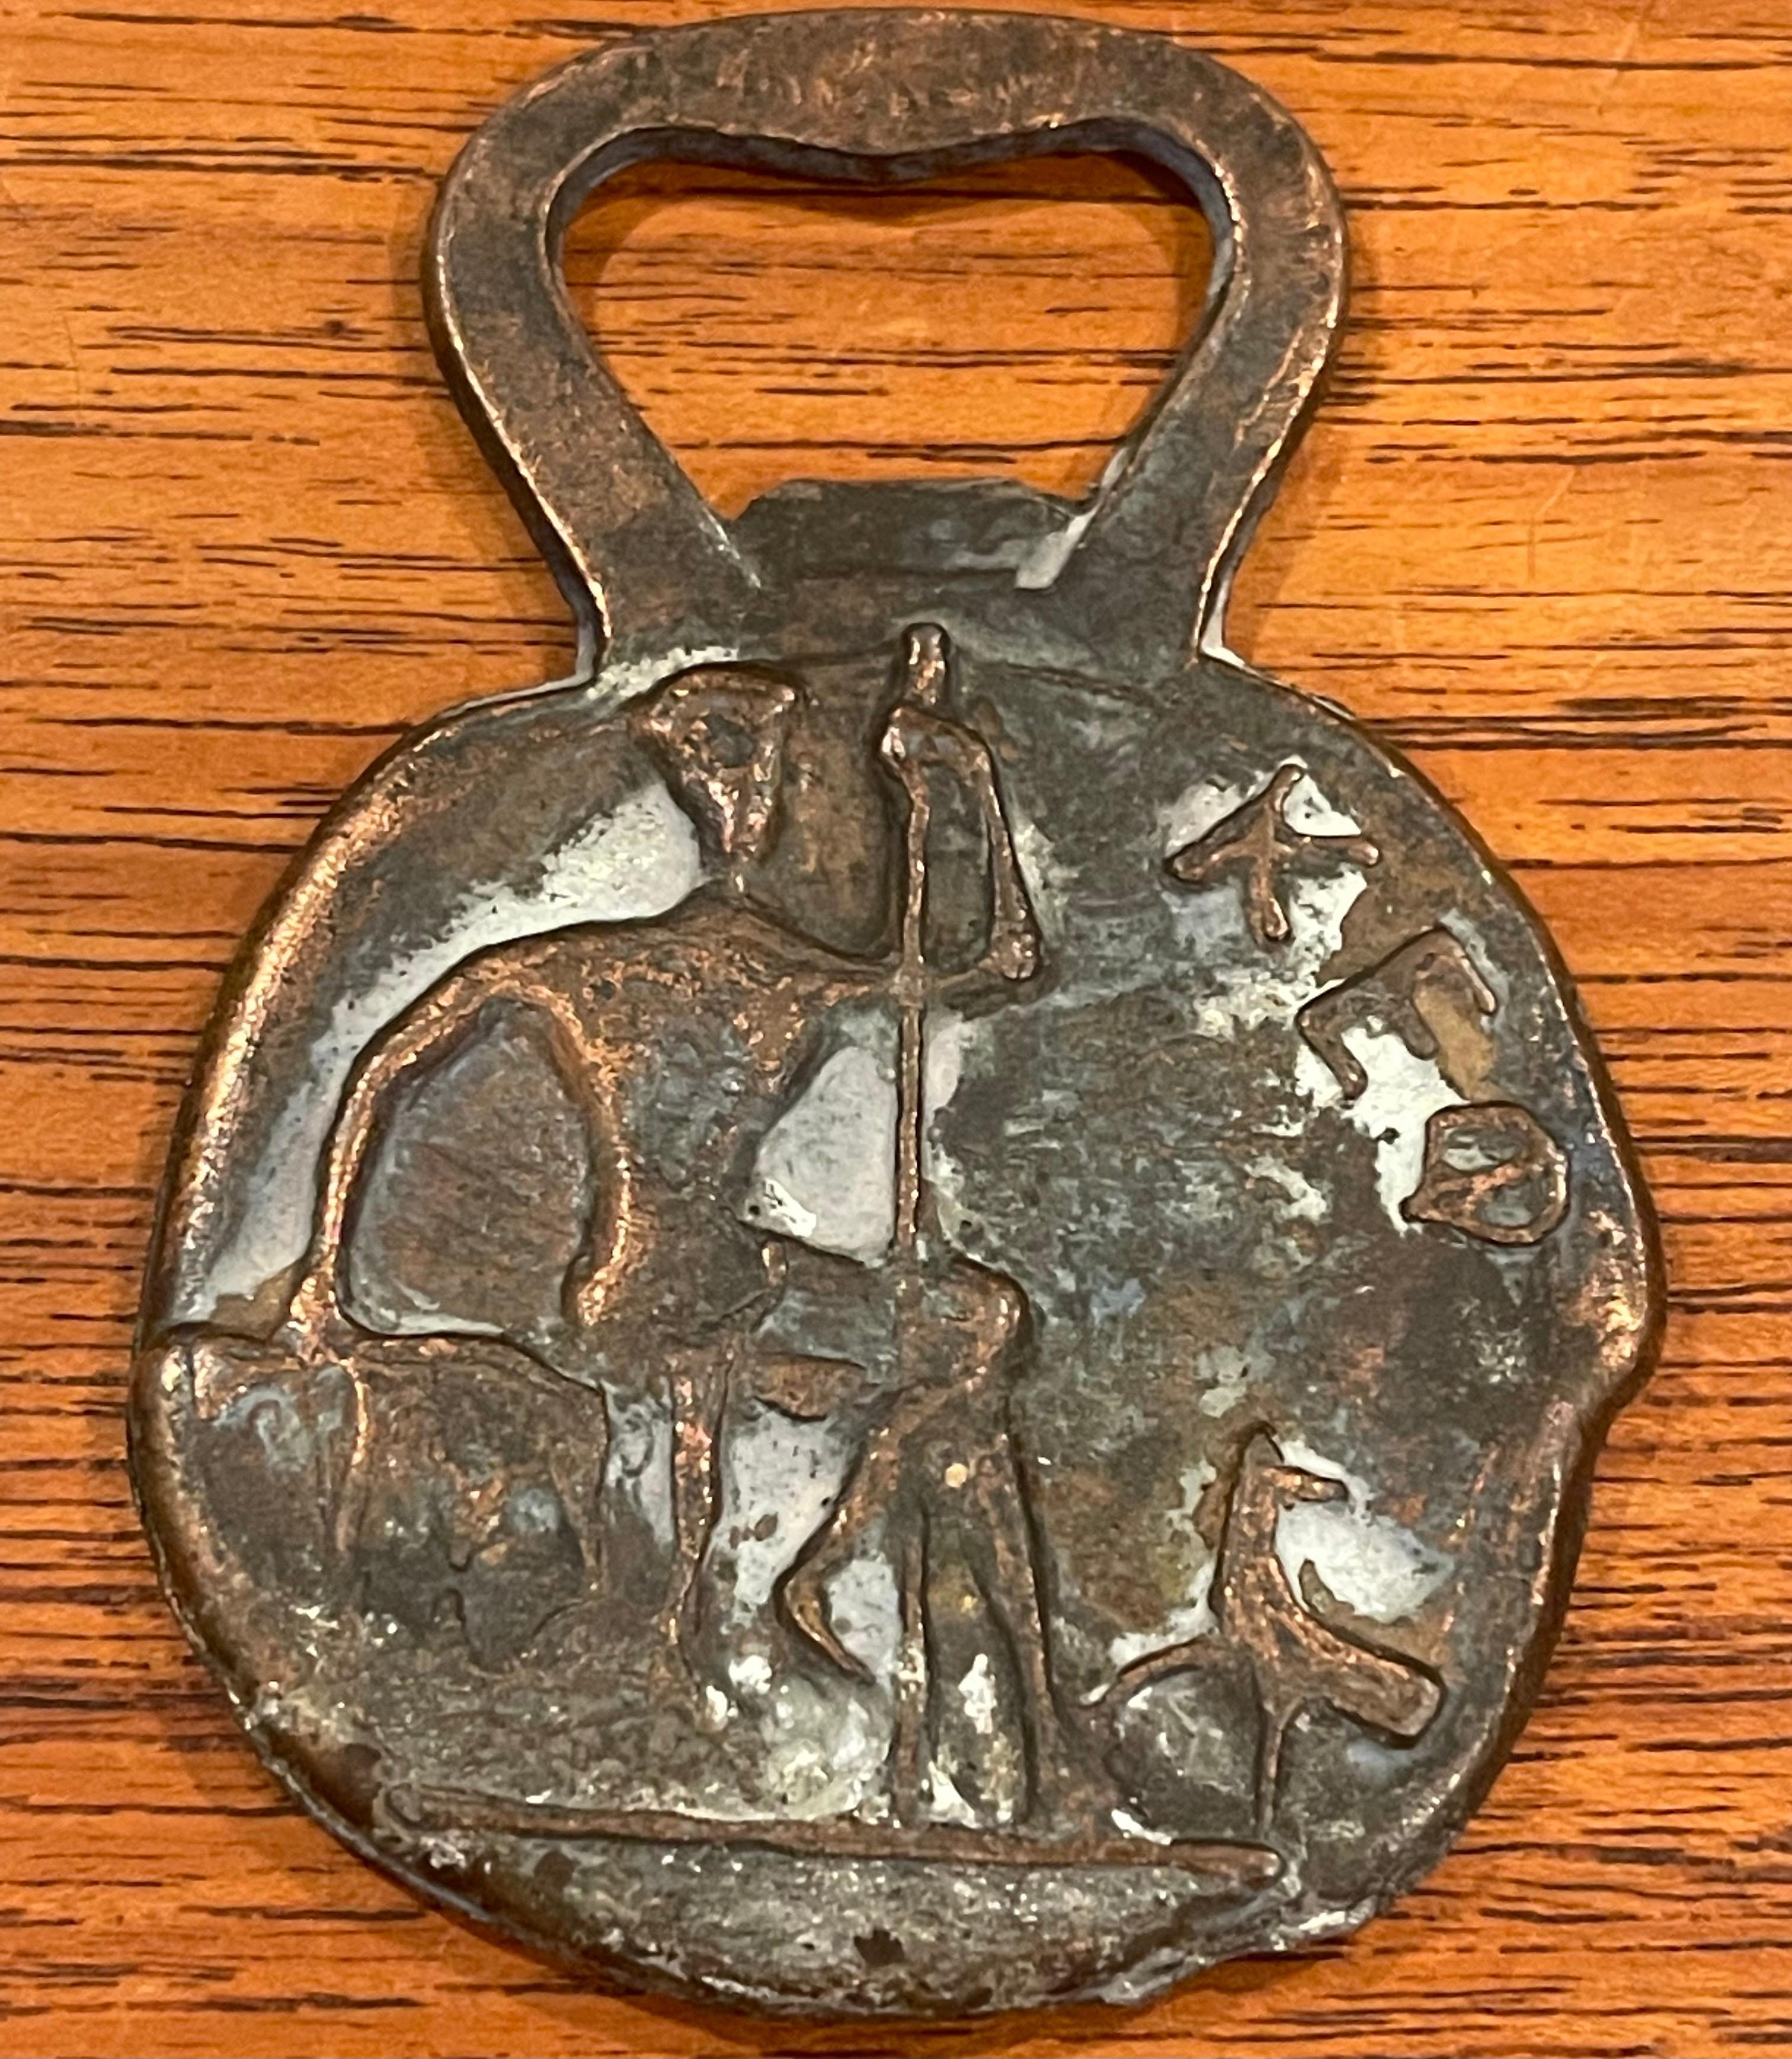 Brutalist style Greek MCM bronze bottle opener, circa 1960s. The piece is in good vintage condition with a great patina and measures 2.25